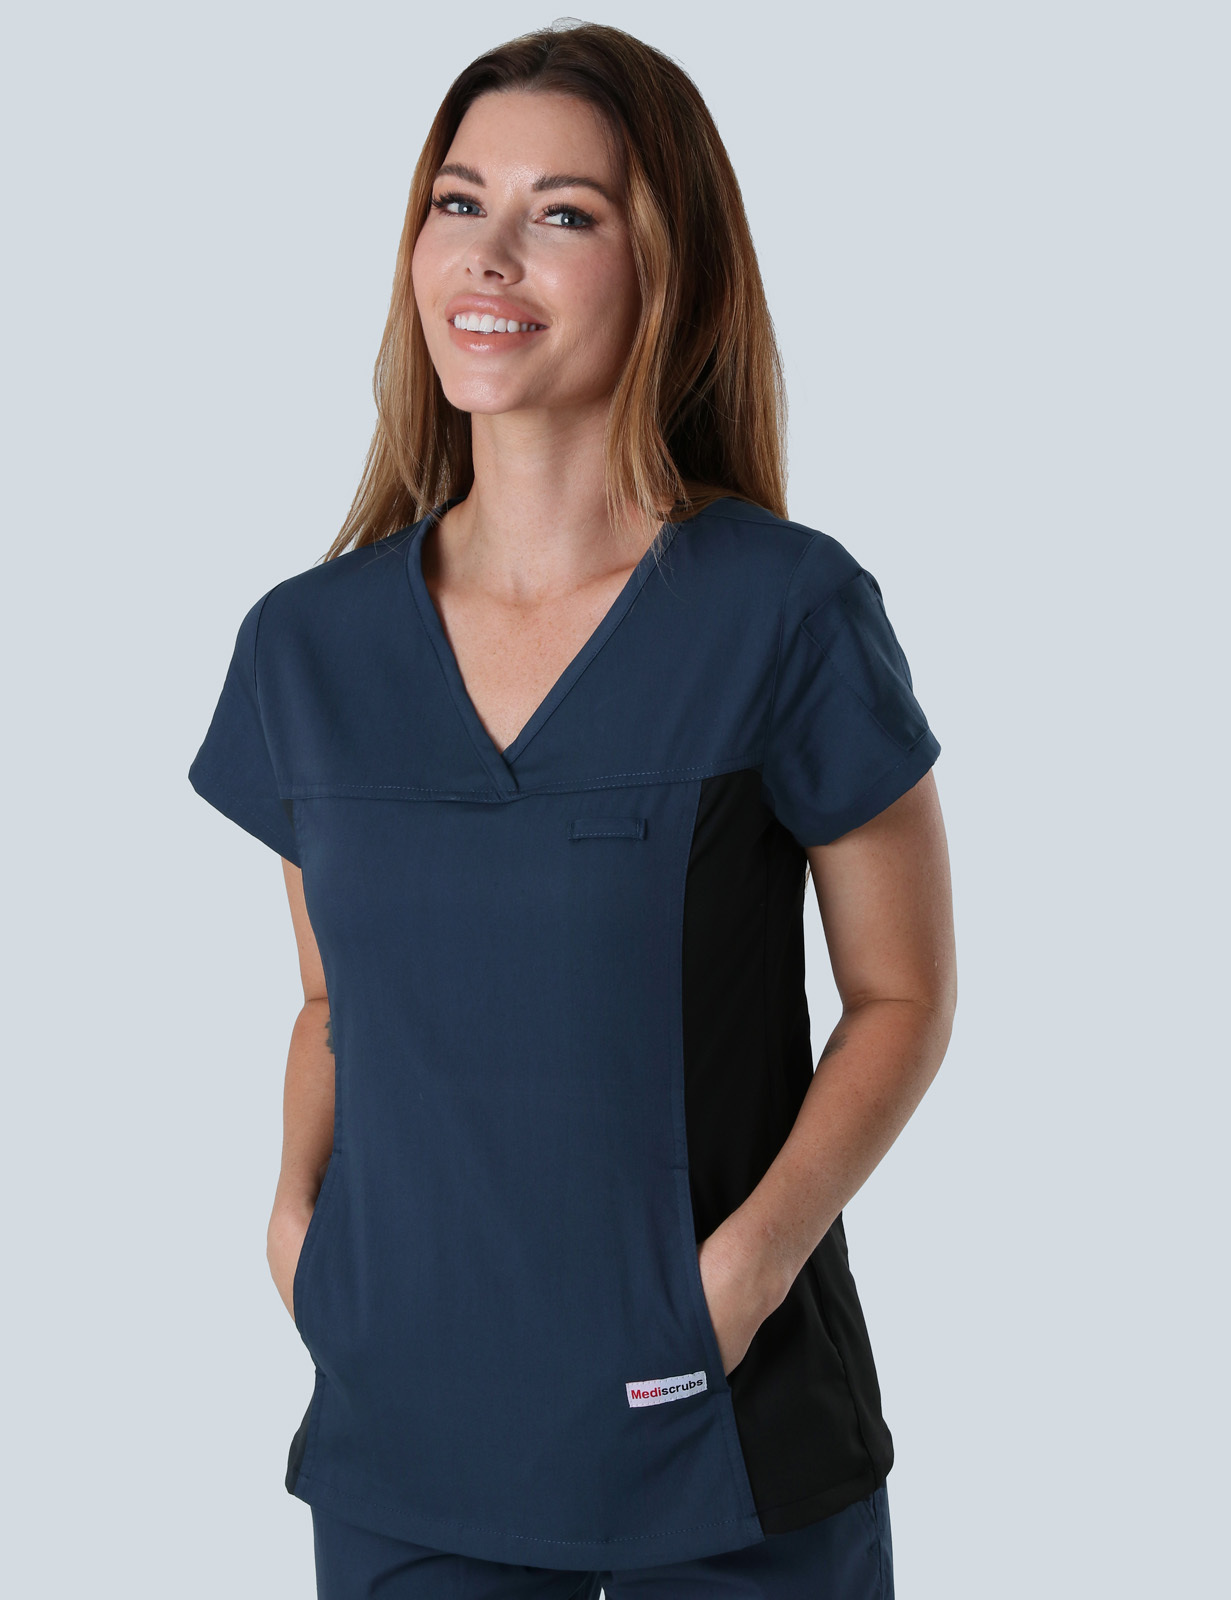 Northern Health - ED Nurse (Women's Fit Spandex Scrub Top and Cargo Pants in Navy incl Logos)